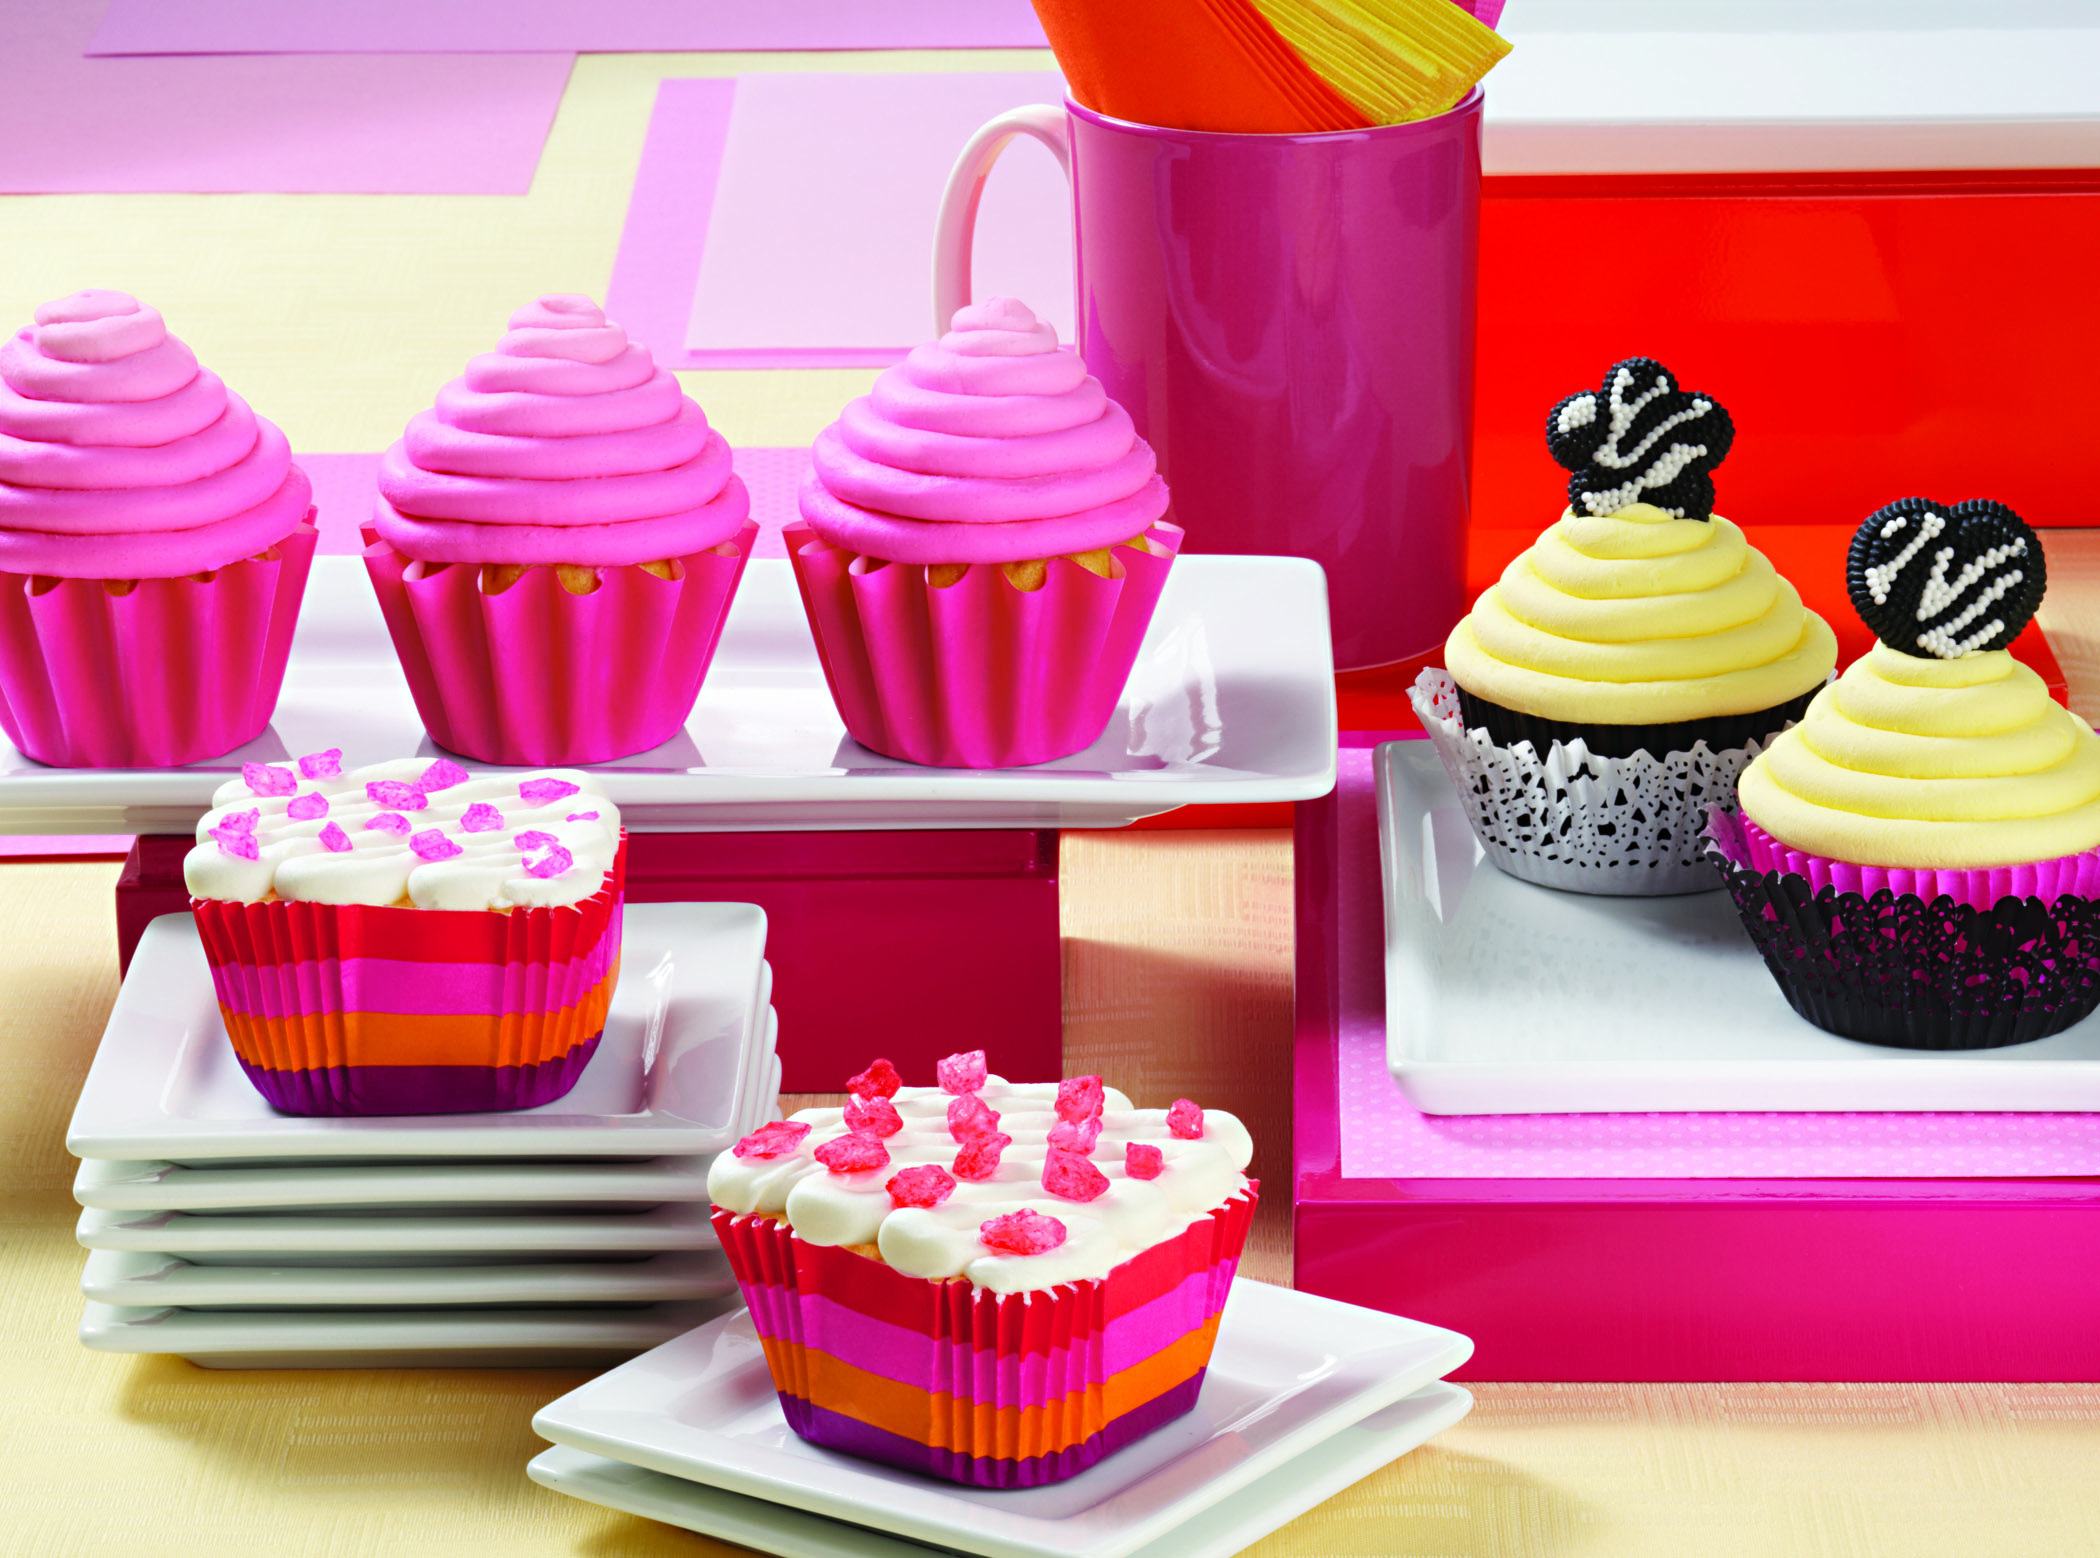 Cupcakes for Every Occasion